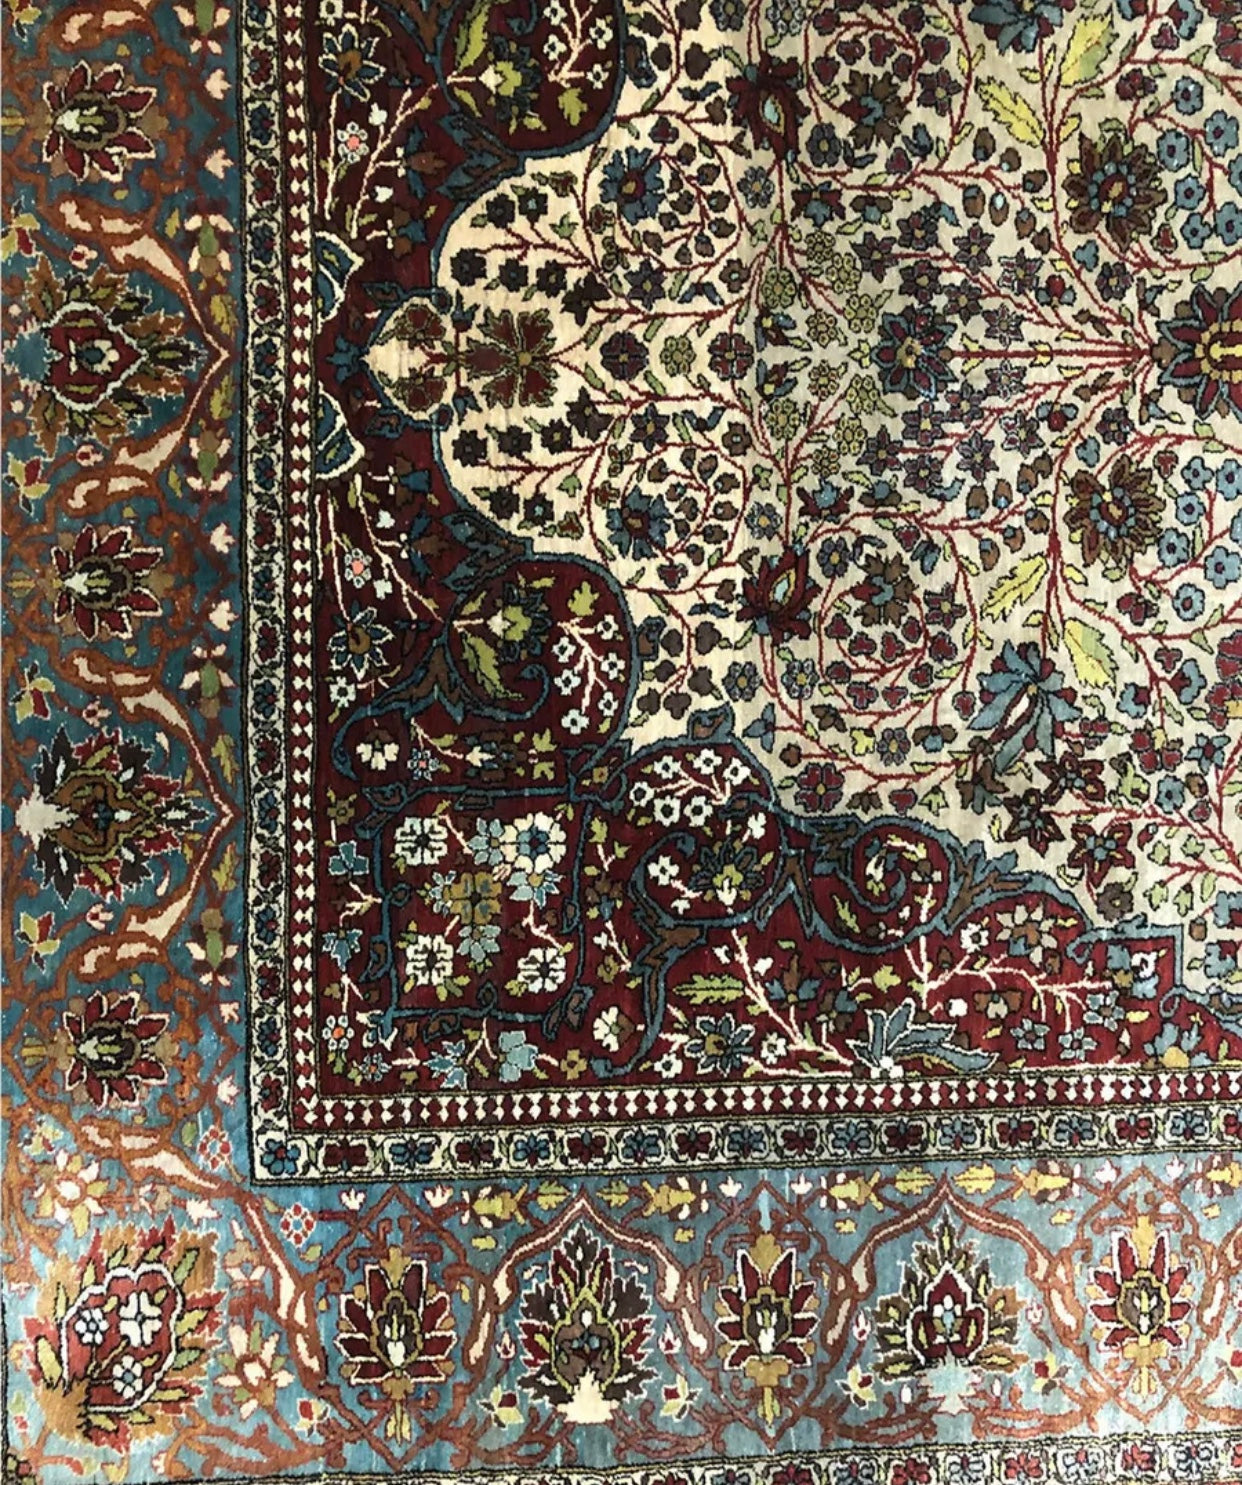 The Most Luxurious Antique 100% Silk Persian Mohtashem Kashan Rug